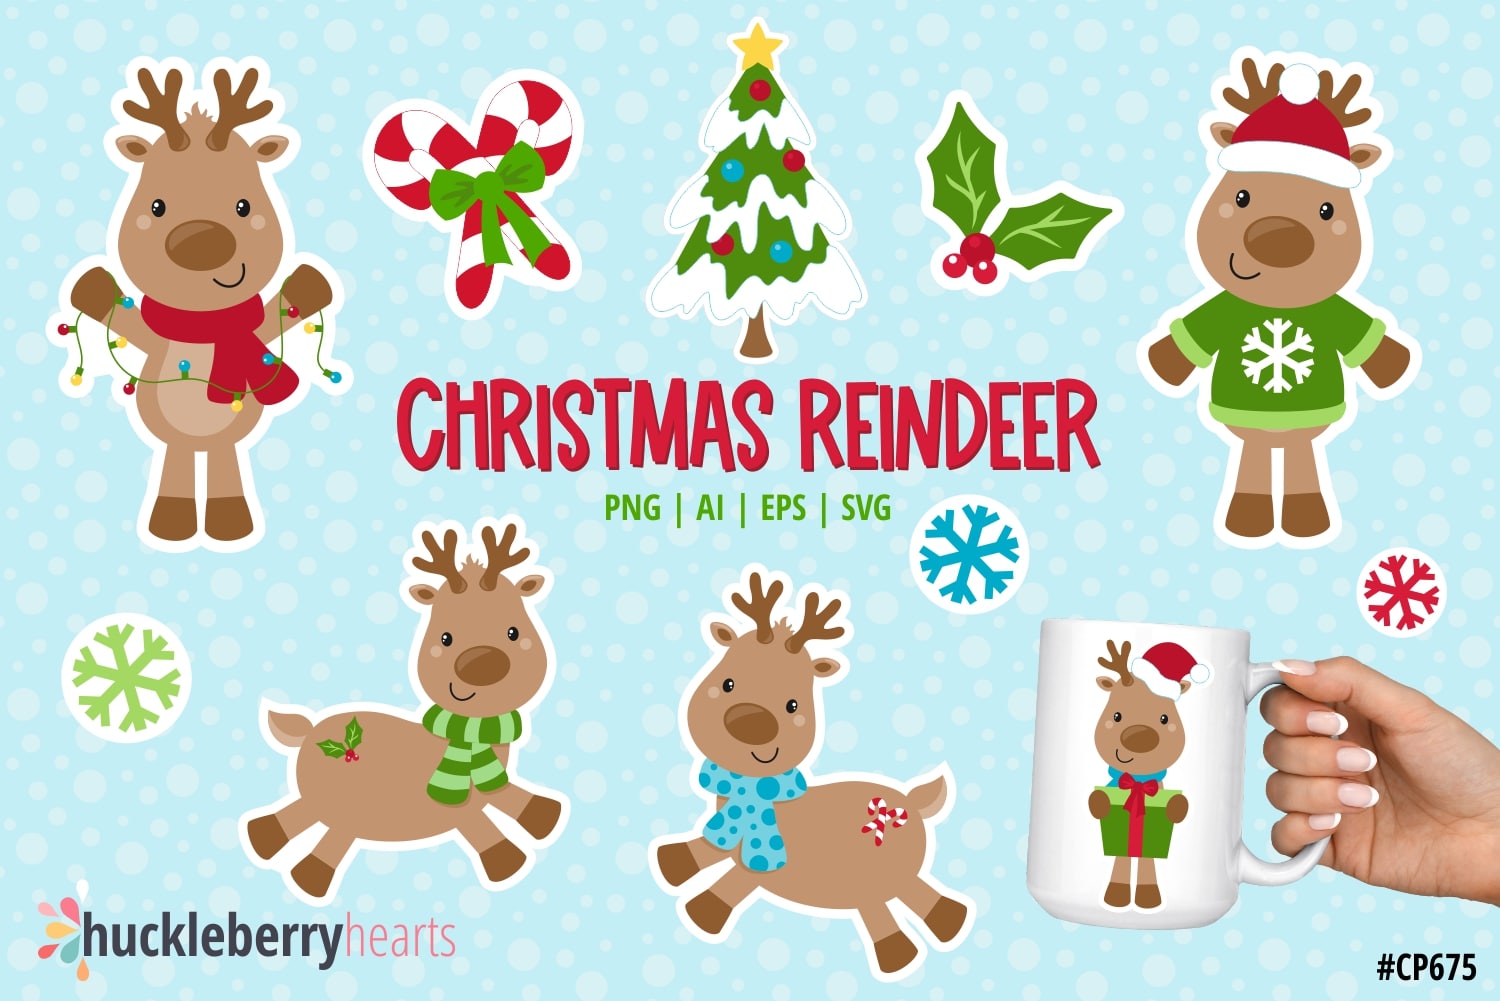 Assorted Christmas Reindeer Clipart and SVG files